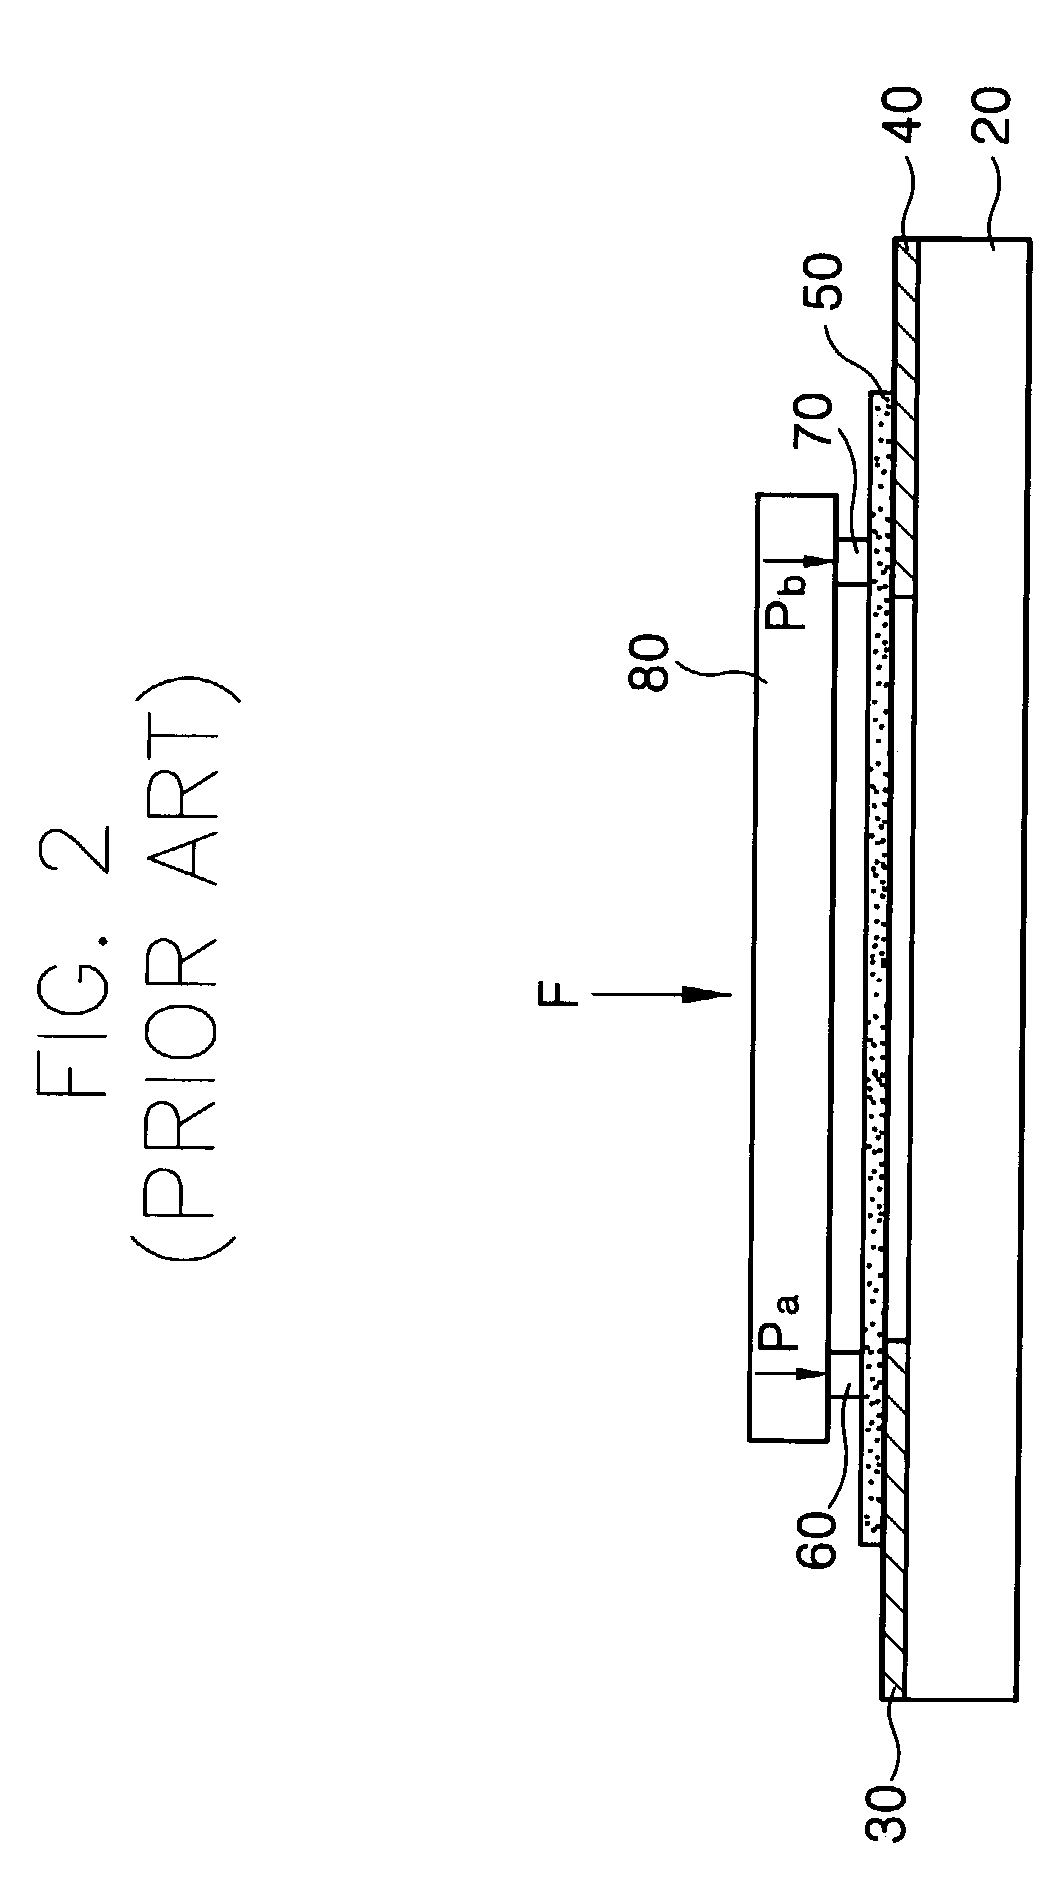 Liquid crystal display driver integrated circuit package